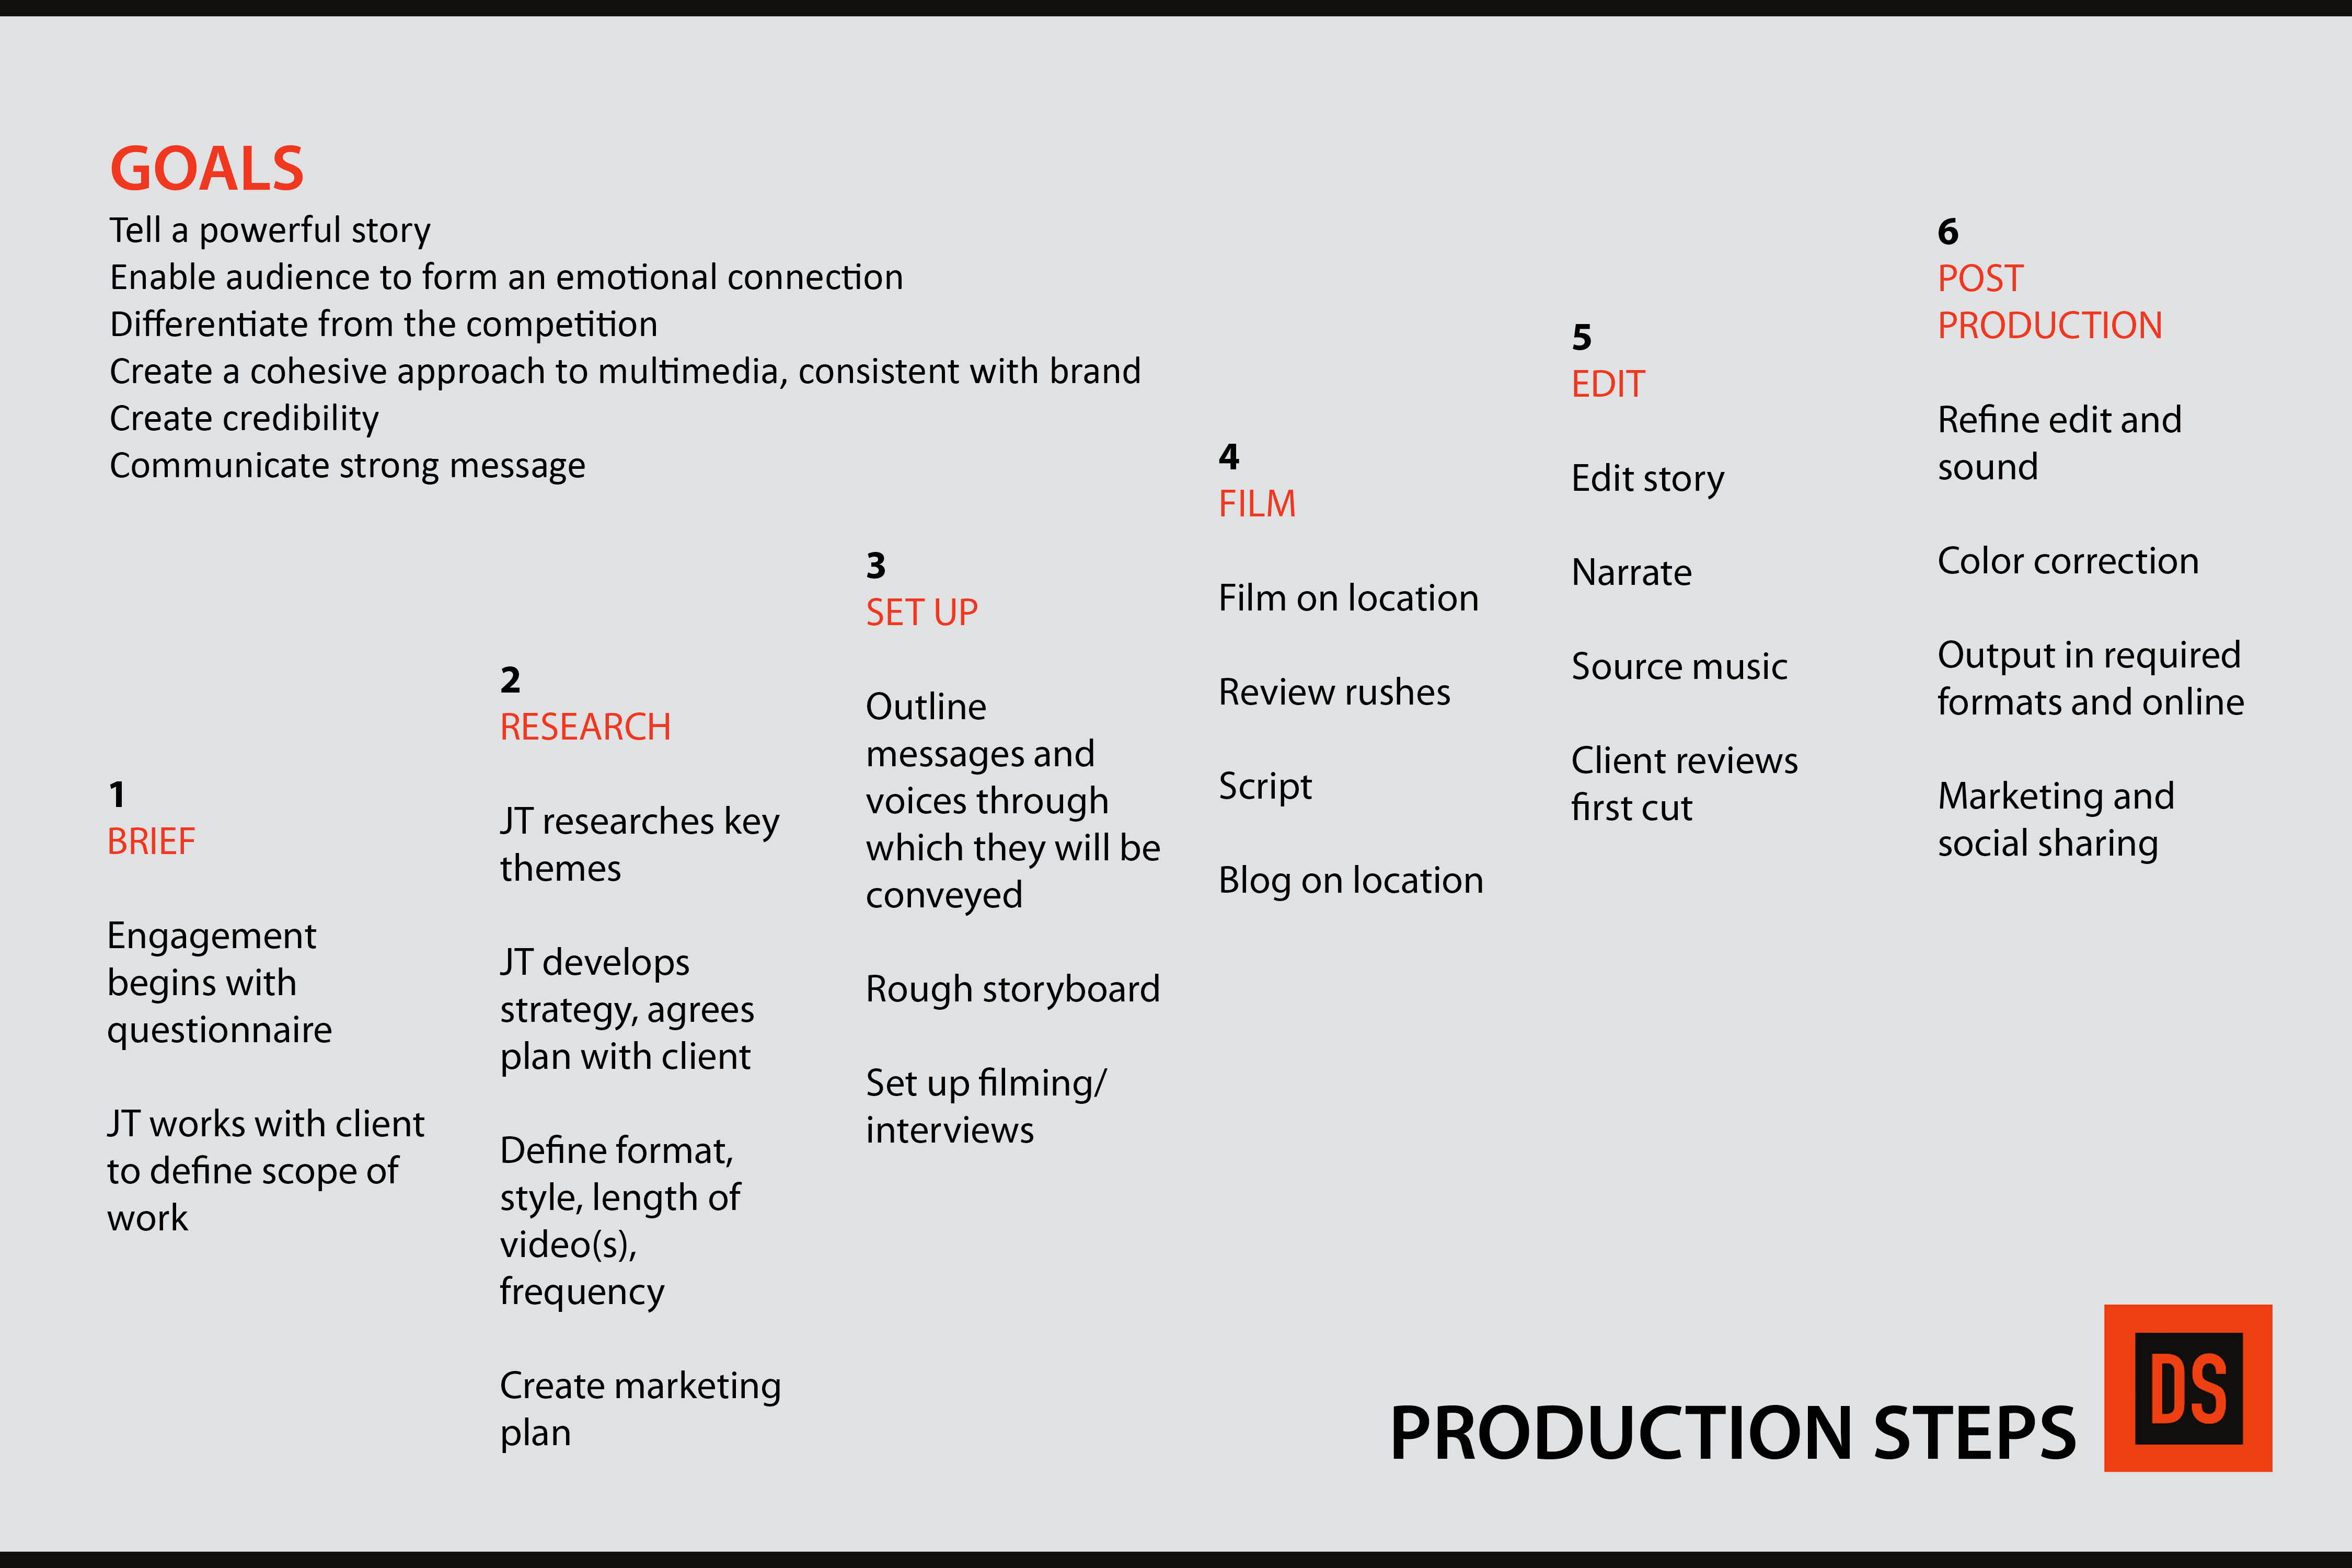 ProductionSteps